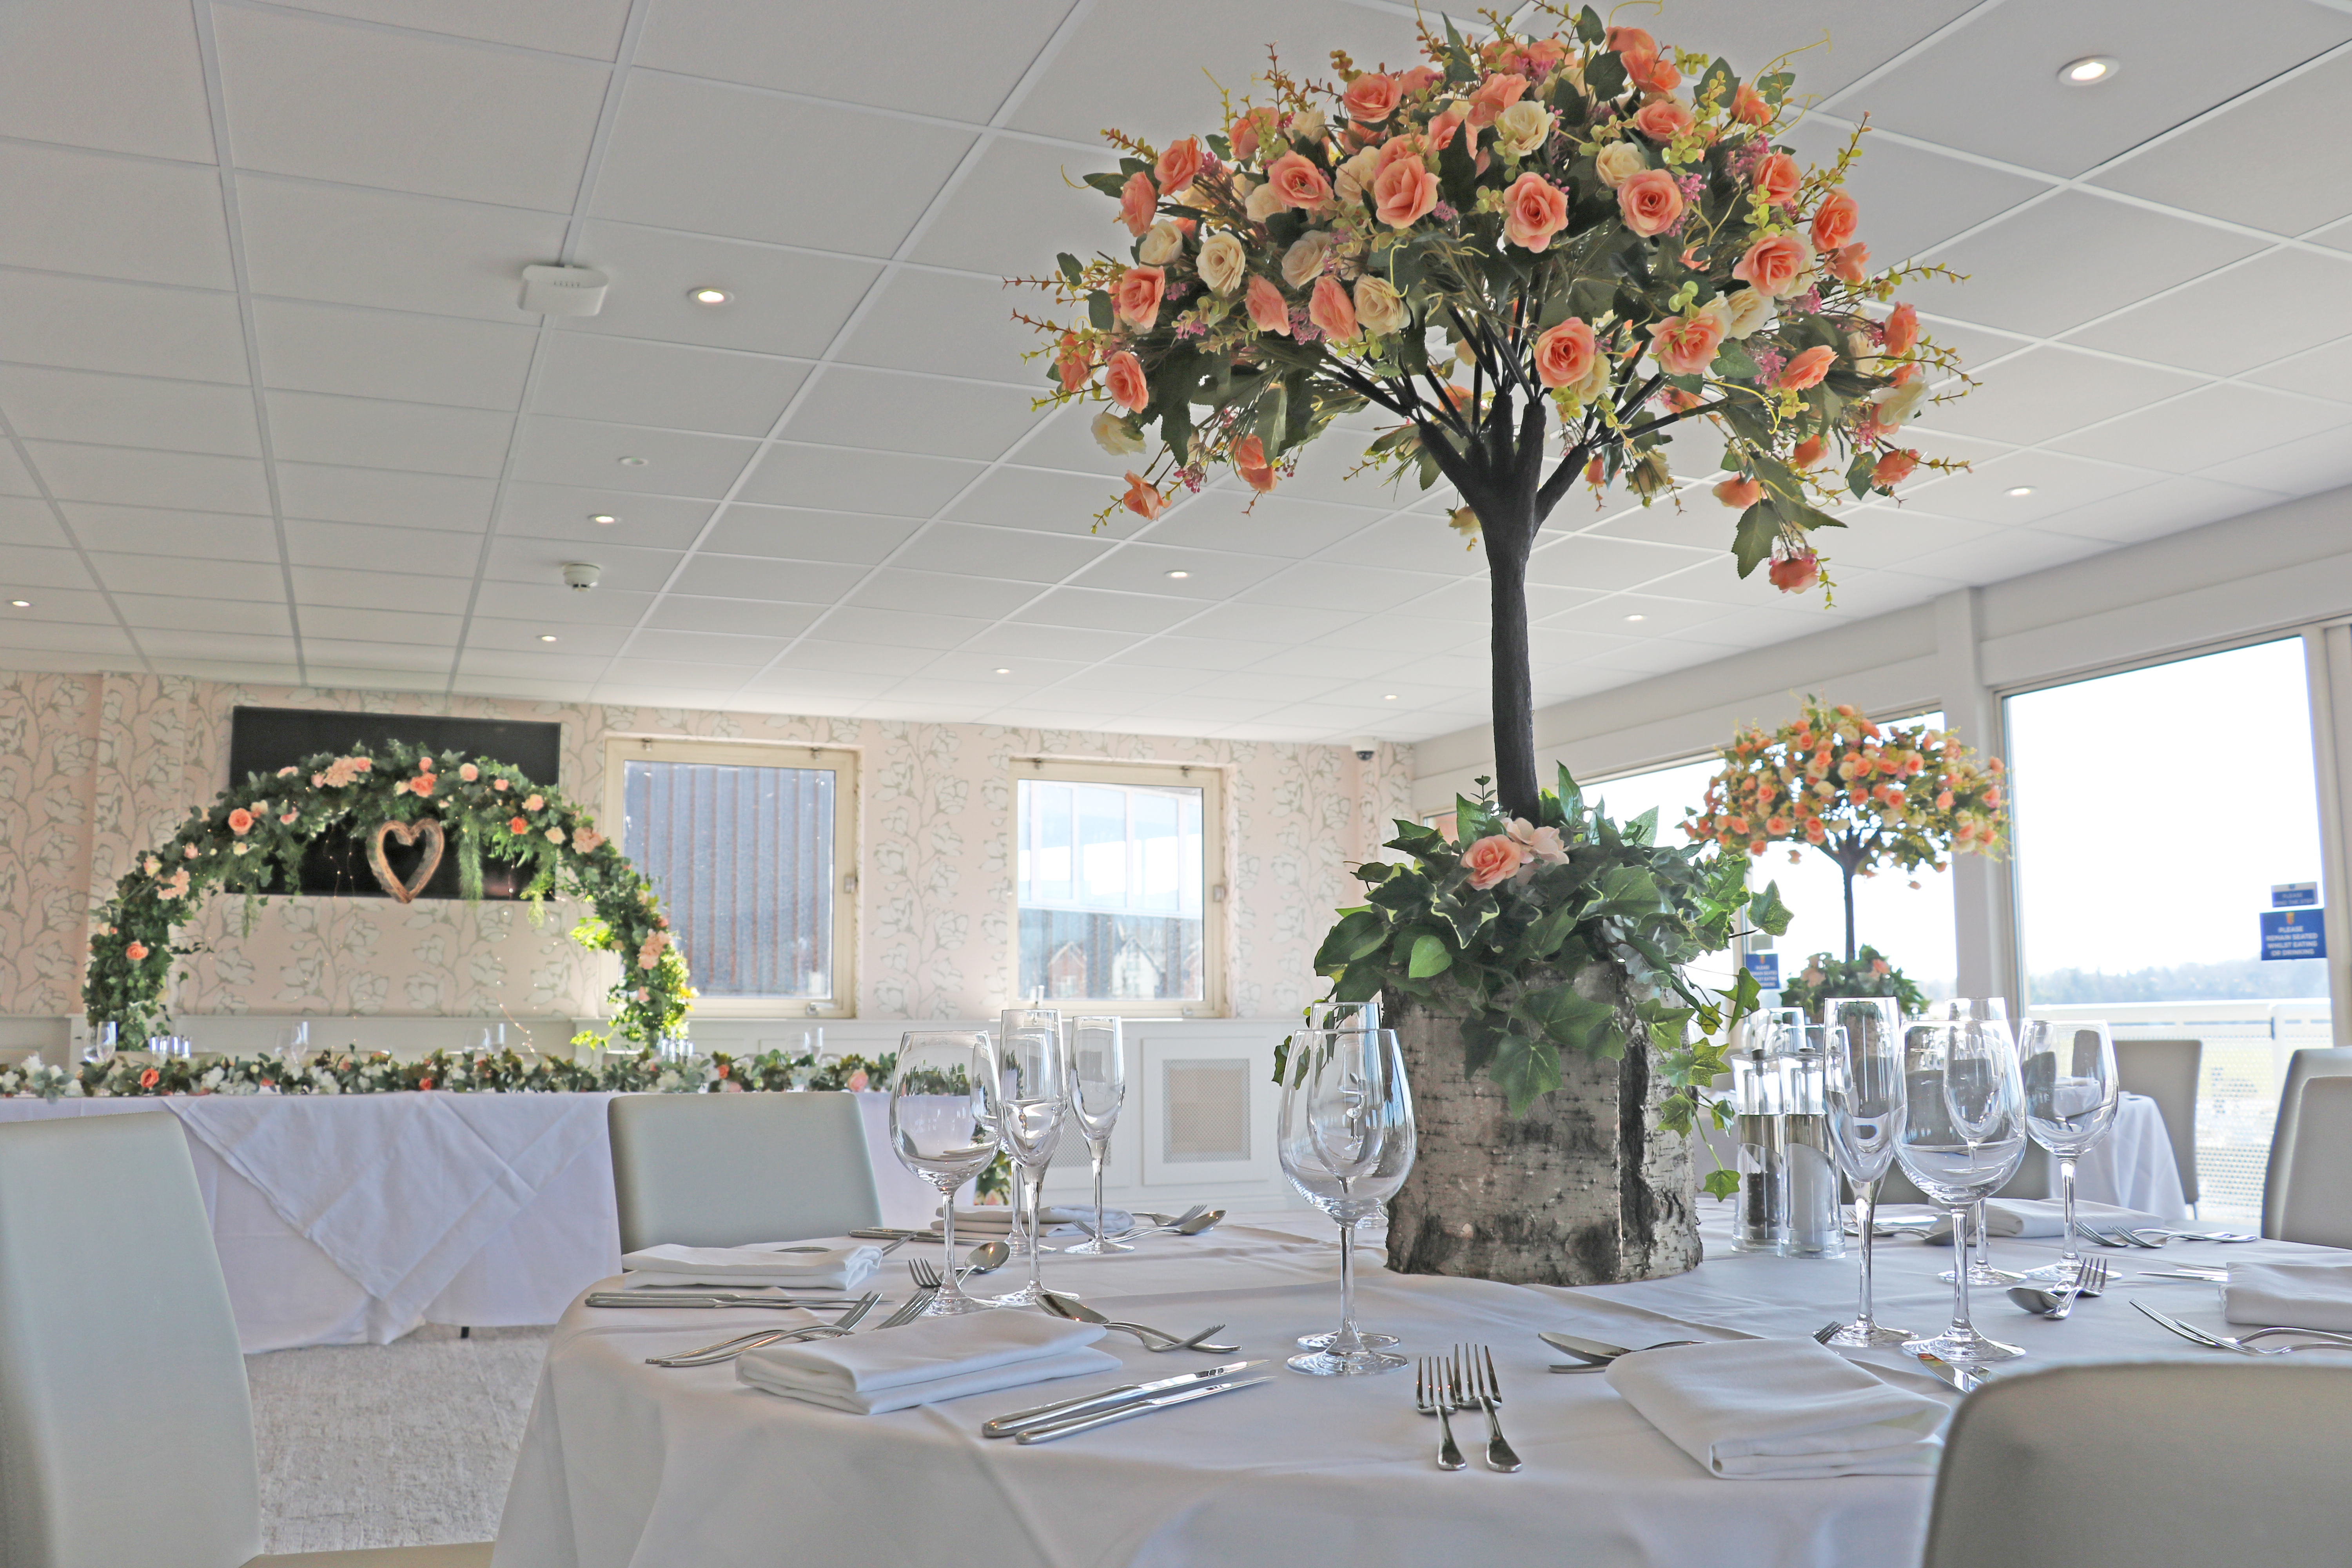 Leverhulme Chester Racecourse dressed for Wedding reception. Orange and pink floral decoration. Flower, botanic arch with heart decoration and table centrepiece 